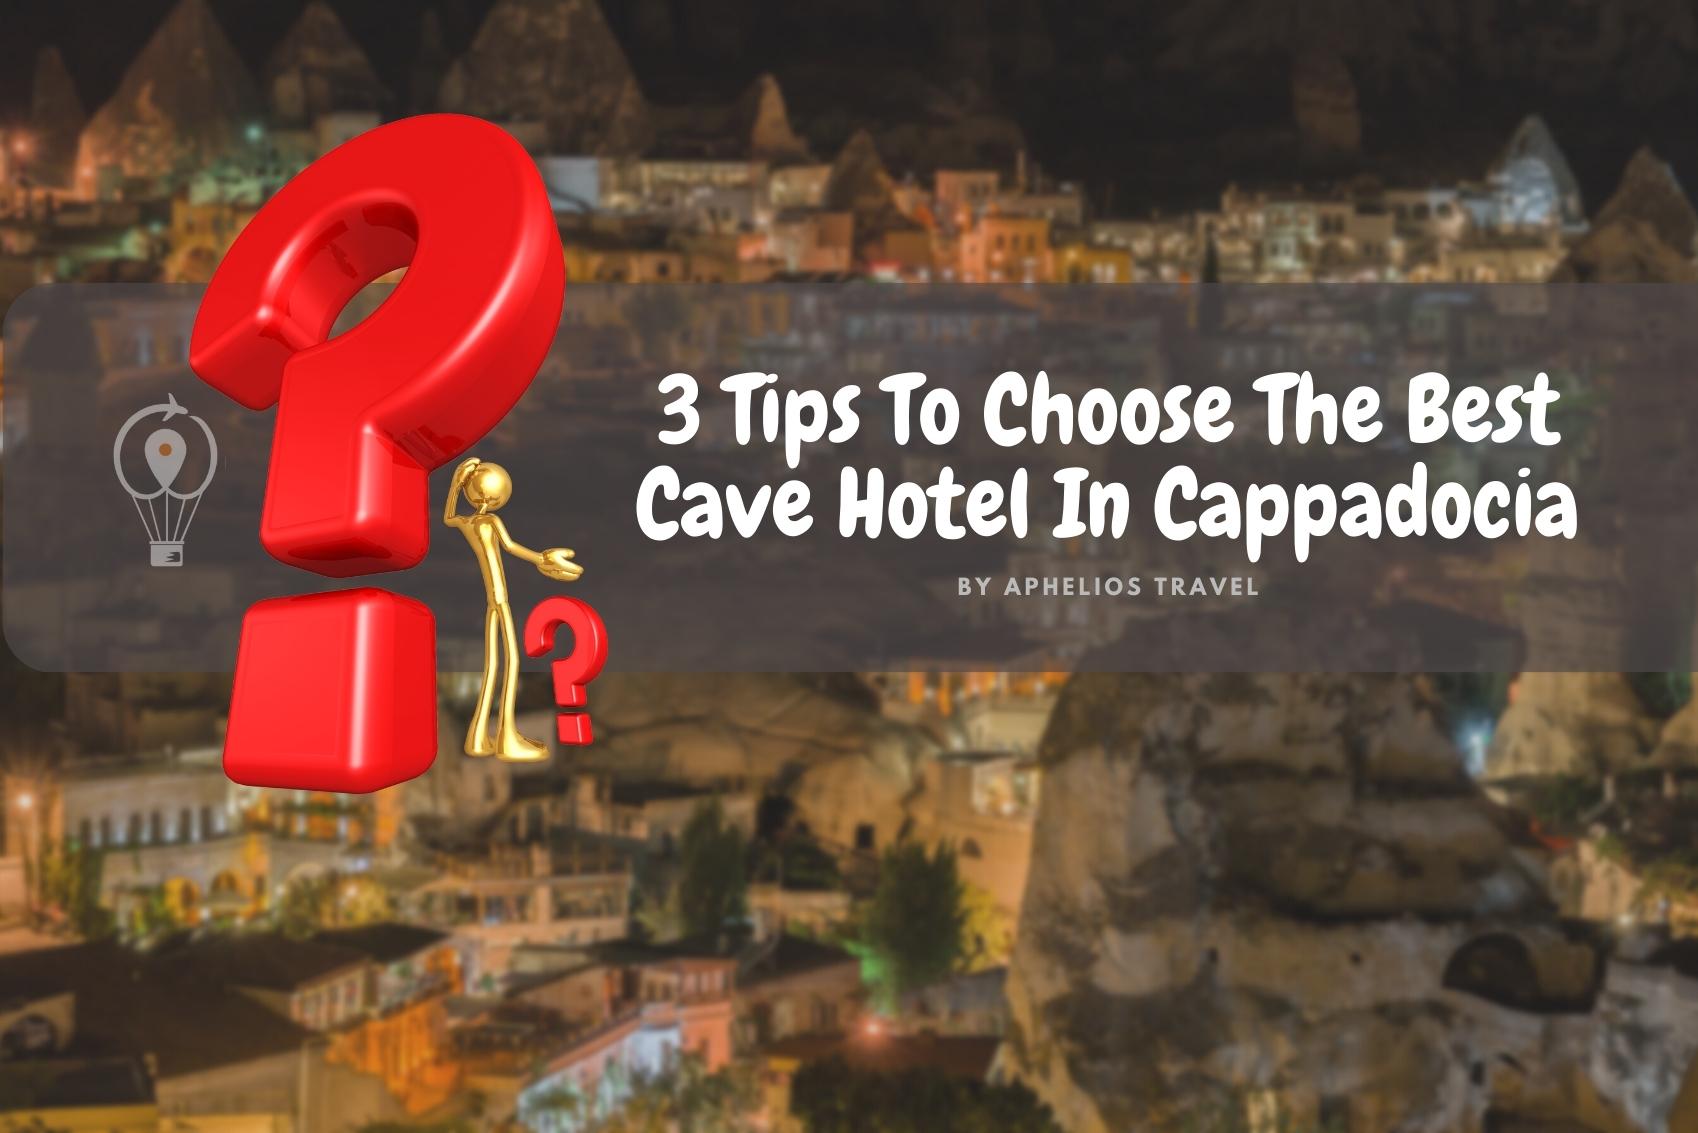 3 Tips To Choose The Best Cave Hotel In Cappadocia